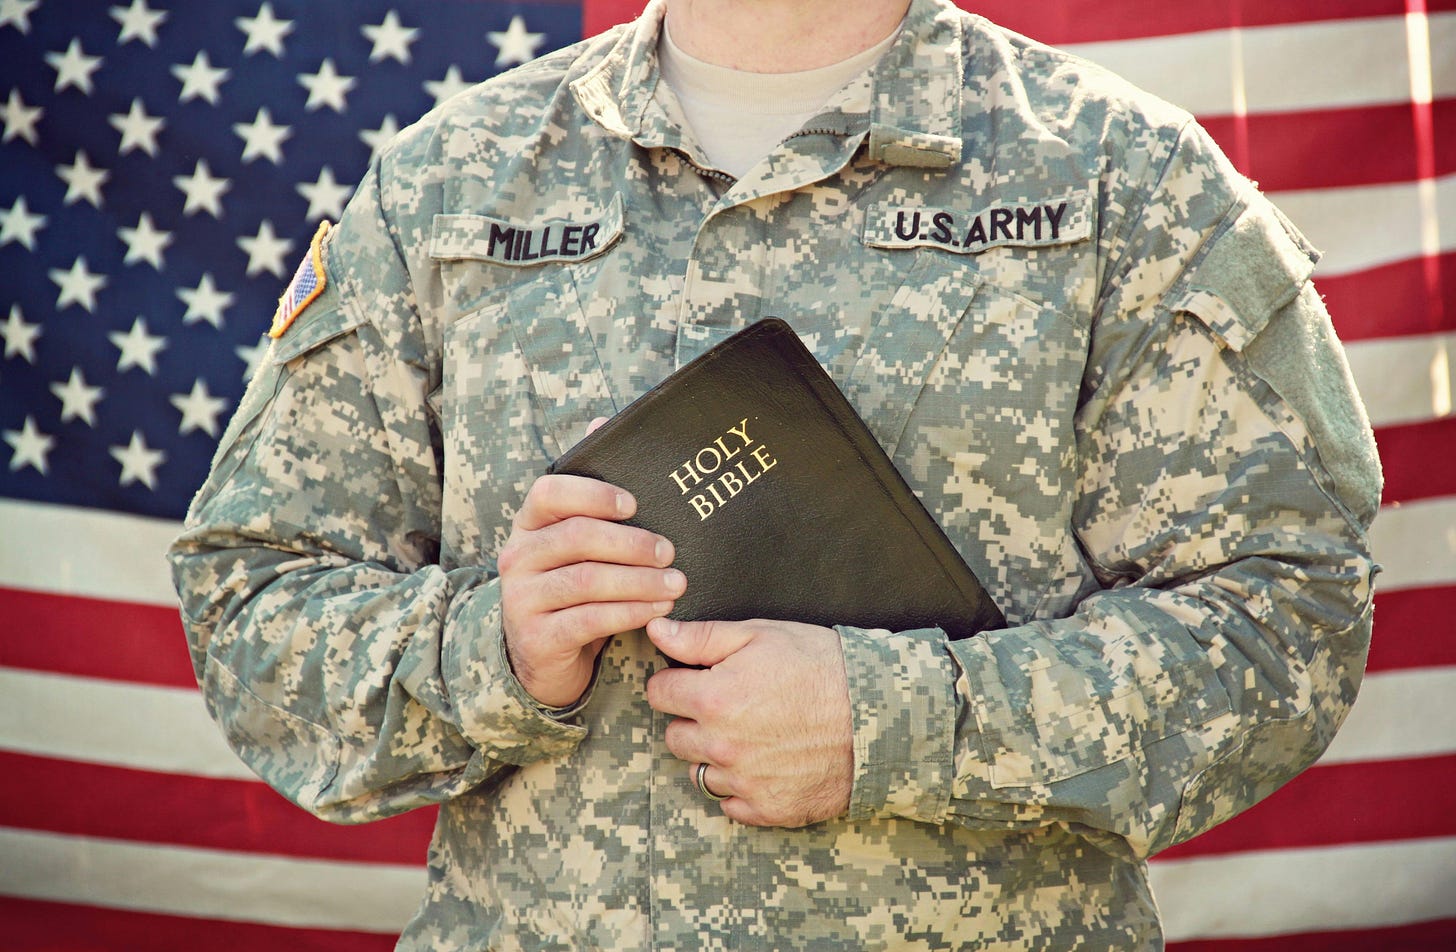 A us solder holds up a bible standing up in front of an American flag.